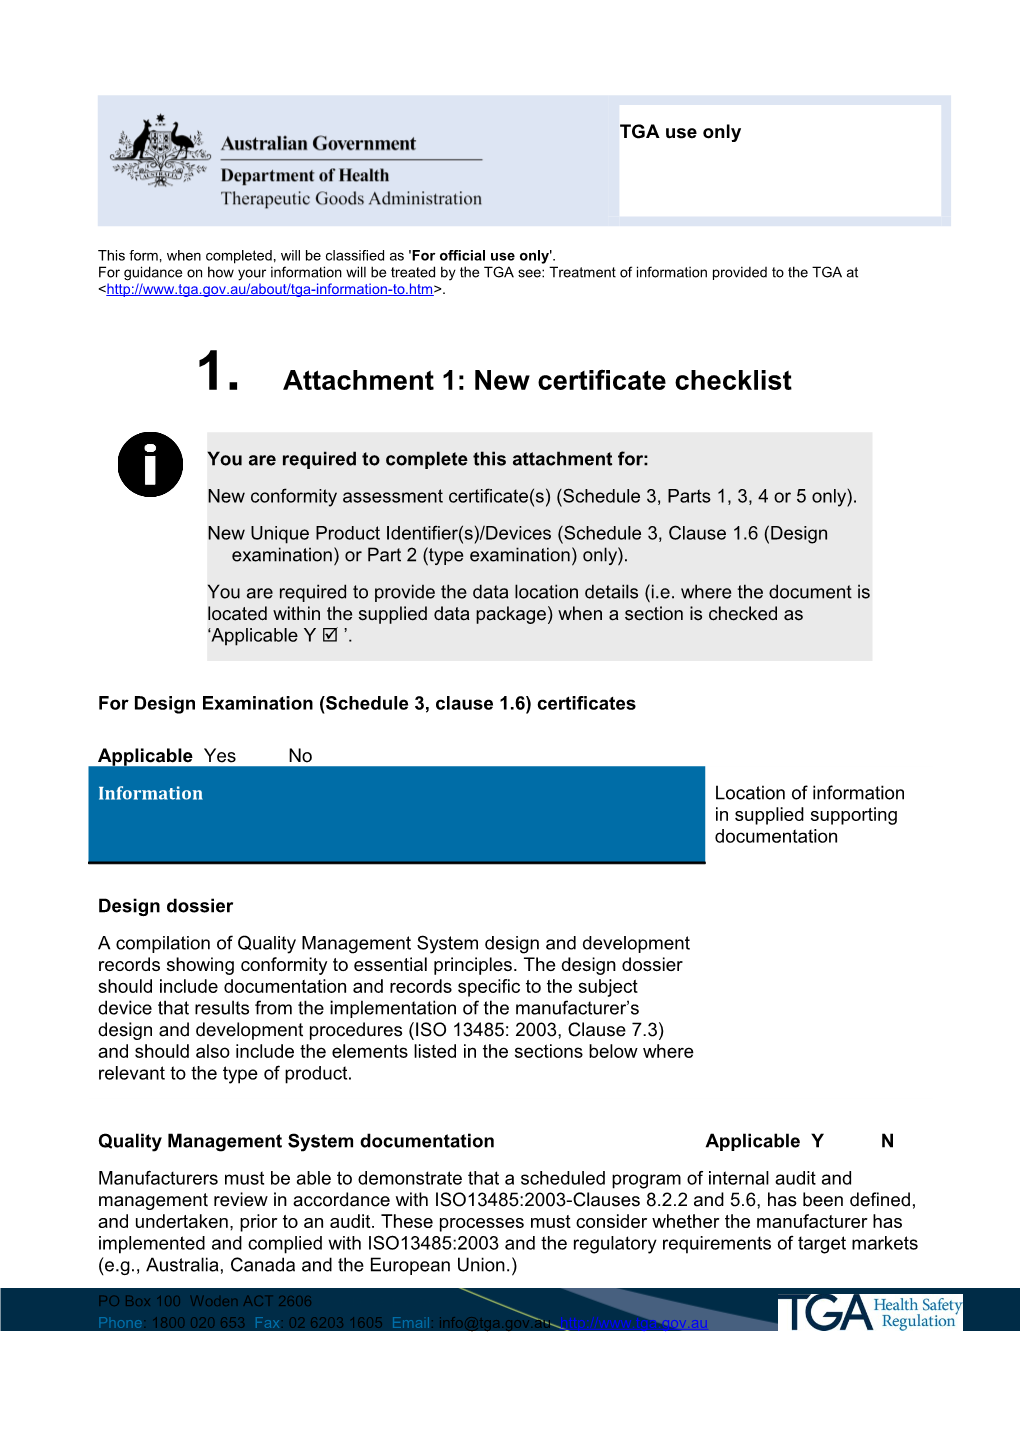 Conformity Assessment Certification - Supporting Data Form: Additional Attachment 1 (New